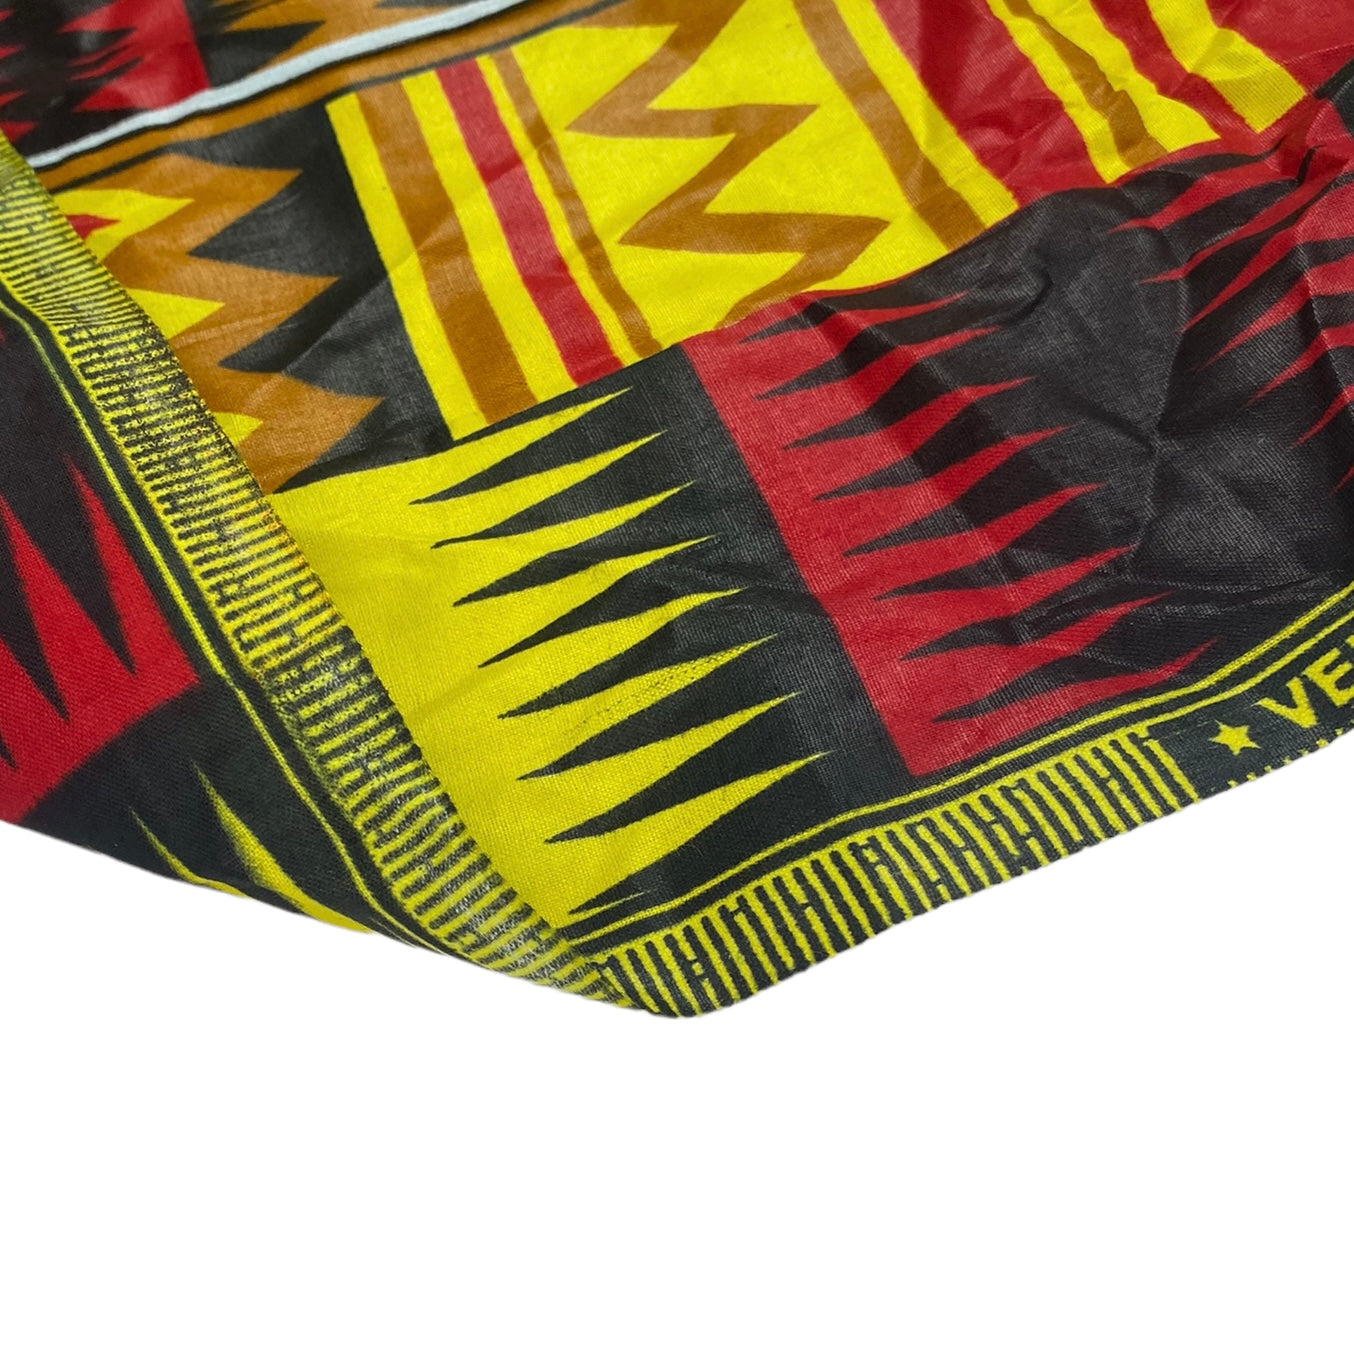 Waxed African Printed Cotton - Multi-Colour / Yellow / Red